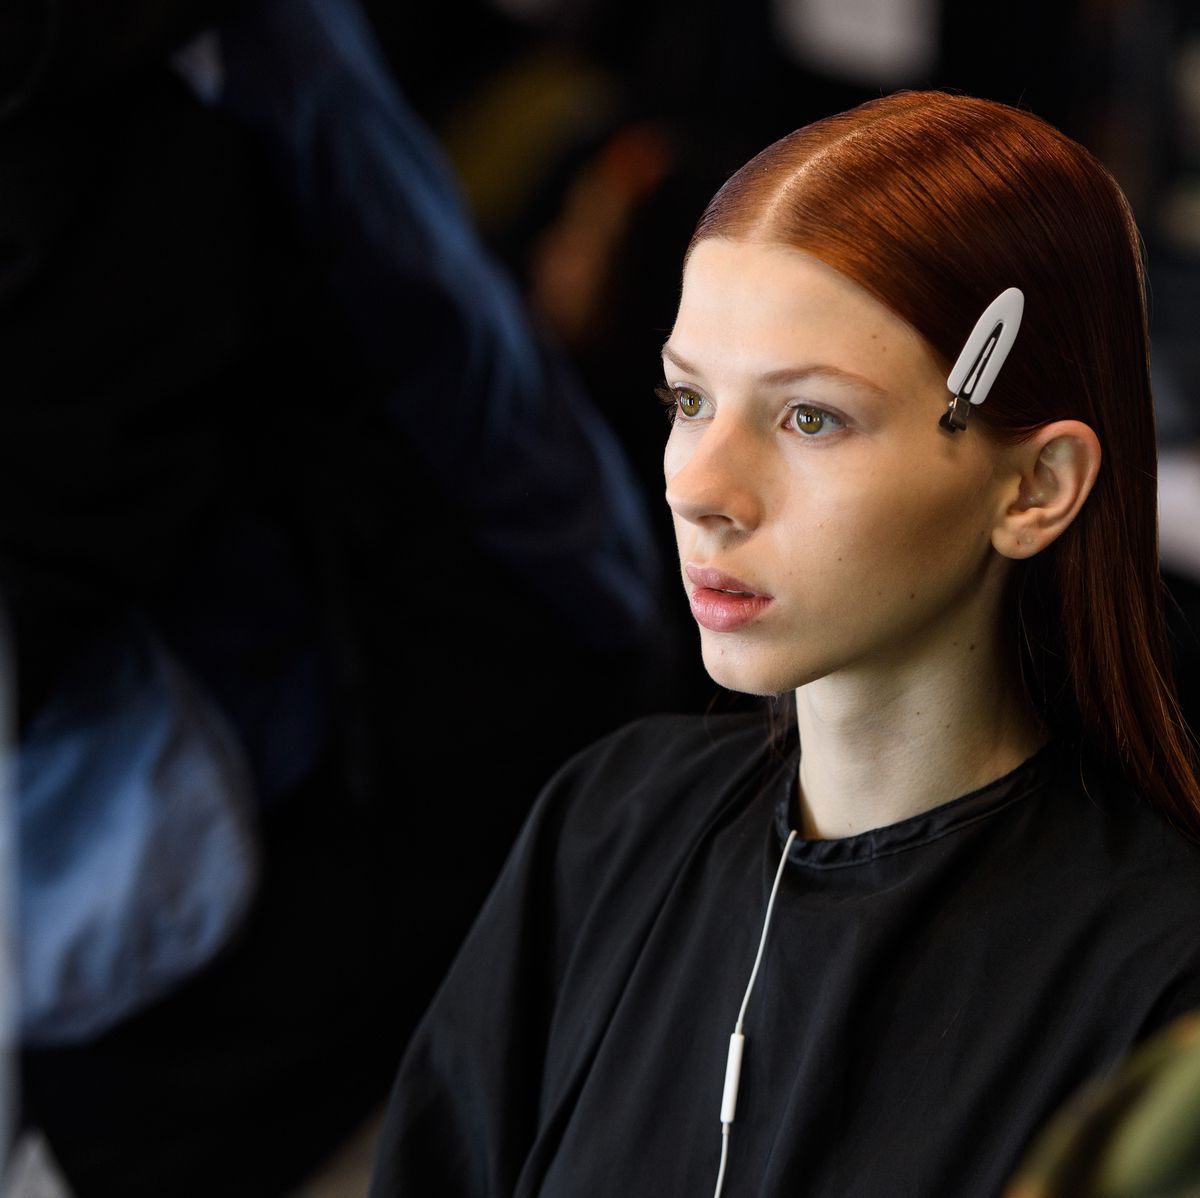 london, england february 20 a model has their hair done backstage ahead of the saul nash show during london fashion week february 2023 on february 20, 2023 in london, england photo by polly thomasbfcgetty images